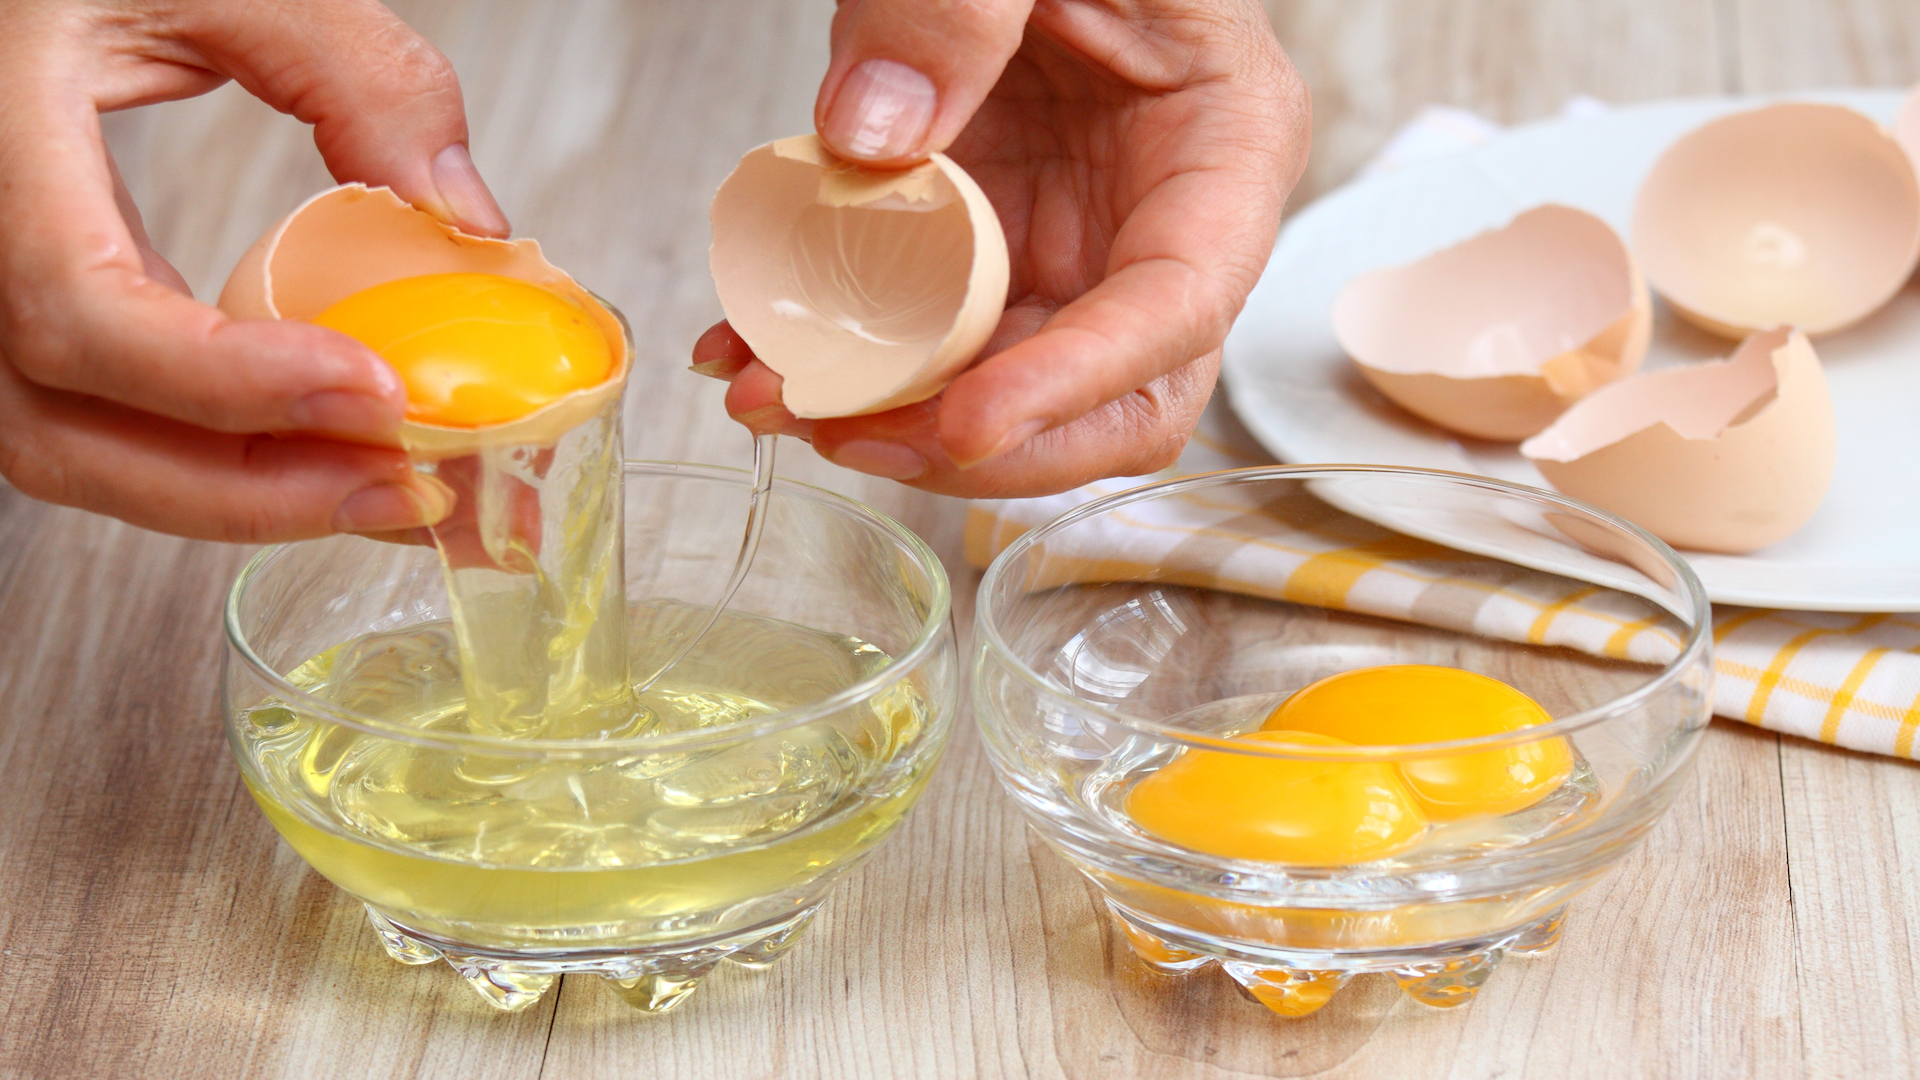 Egg Whites: Health benefits & nutrition facts | Live Science